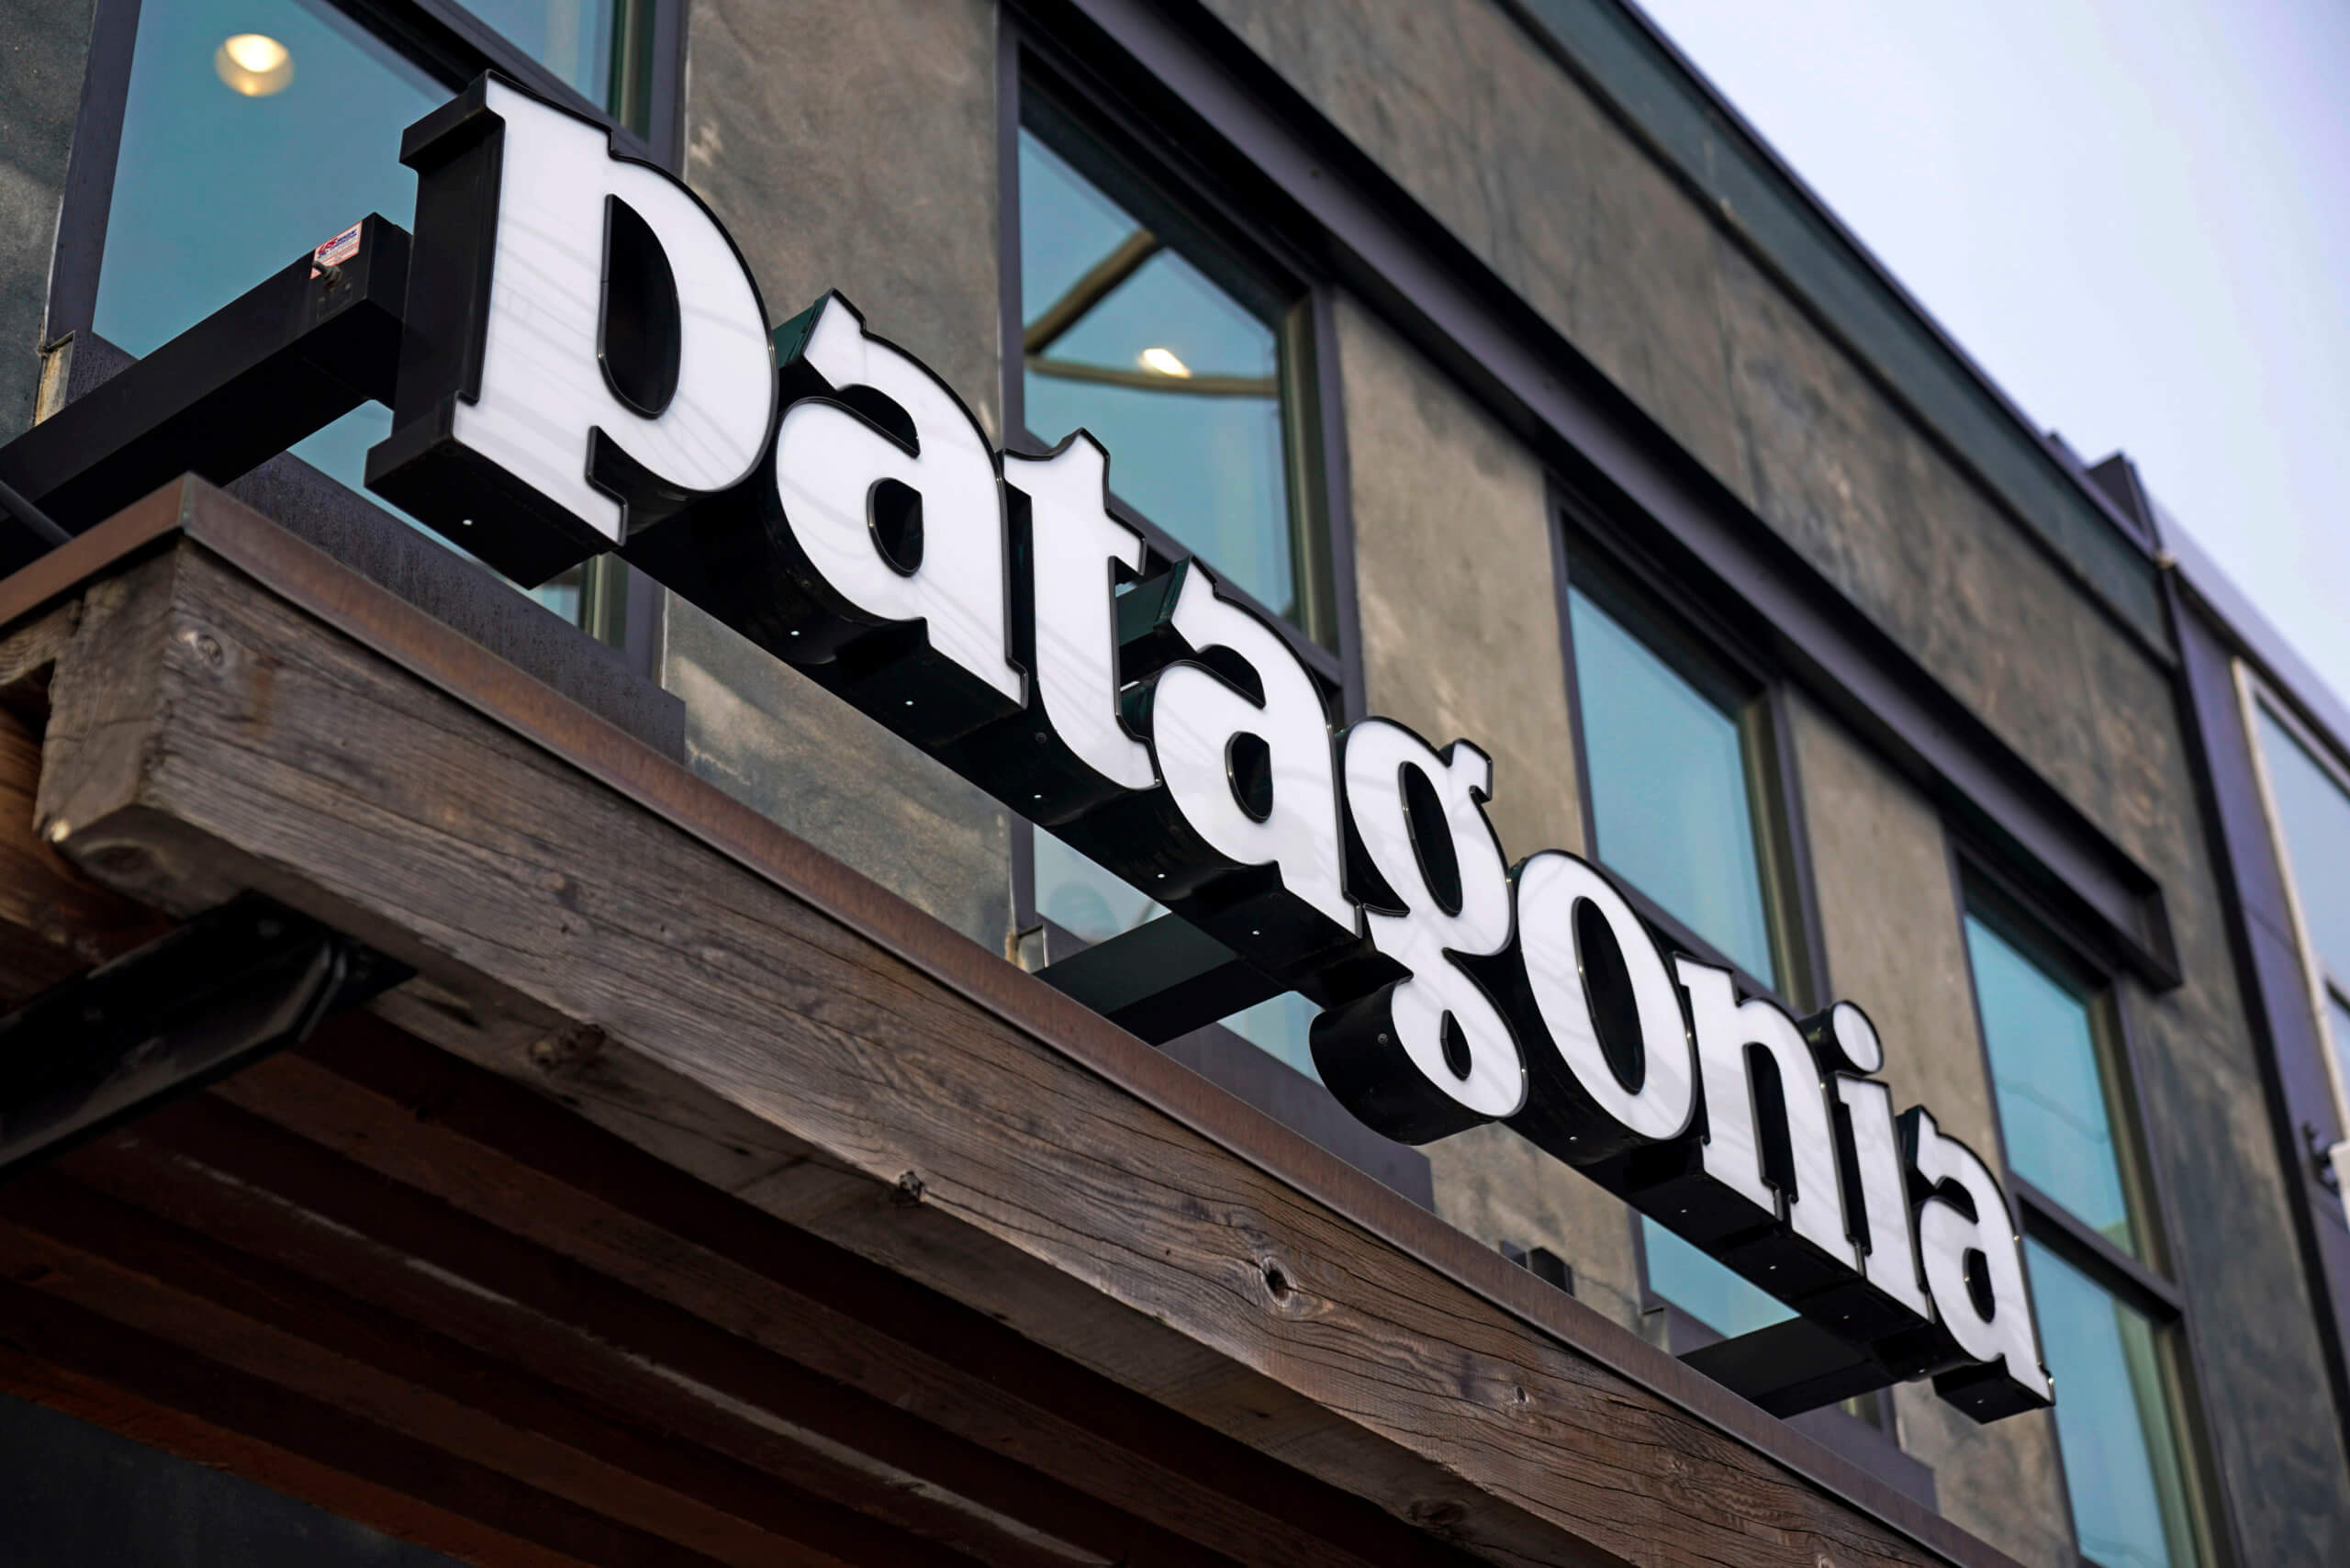 FILE - A Patagonia store is seen on Jan. 12, 2022, in Pittsburgh. The founder of outdoor gear company Patagonia, long known for environmental activism, said Wednesday, Sept. 14, 2022, that the company is transferring all of its voting shares into a trust “dedicated to fighting the environmental crisis and defending nature.” (AP Photo/Gene J. Puskar, File)